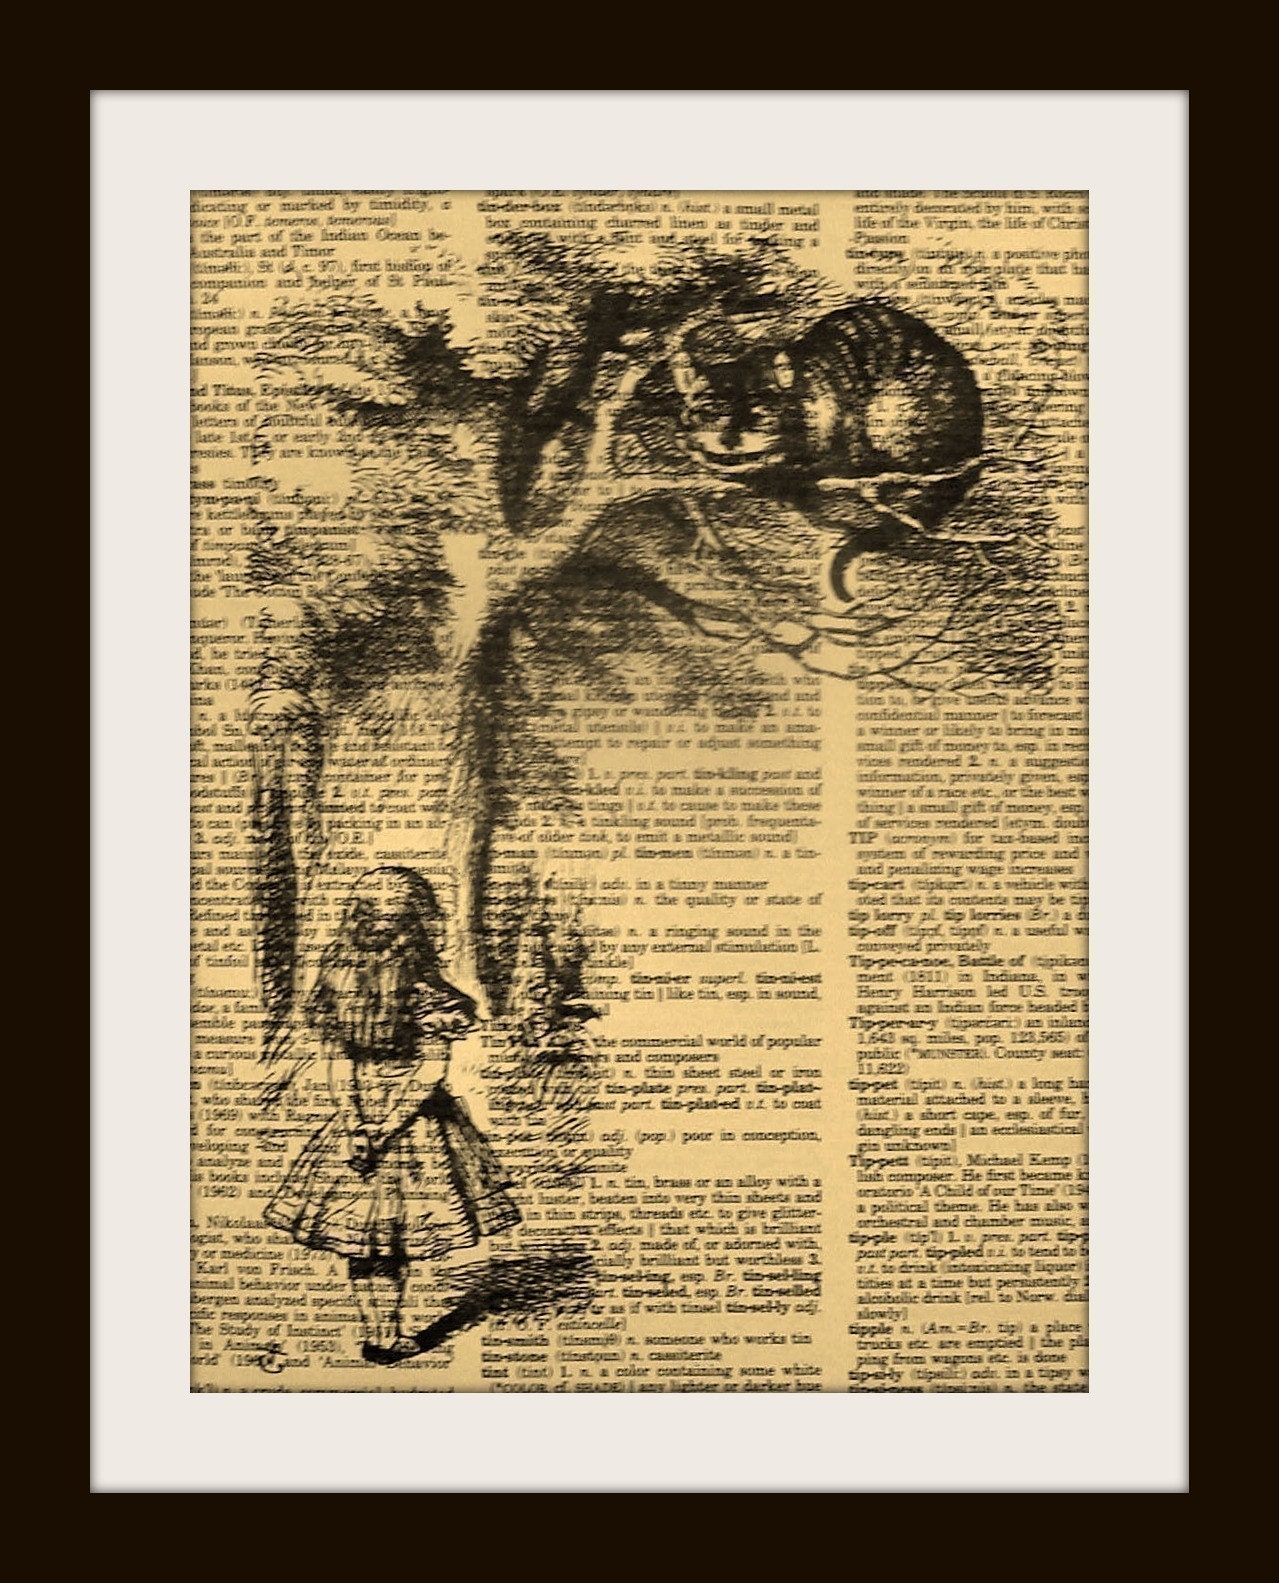 ALICE IN WONDERLAND CHESHIRE CAT IN TREE Print on Vintage Dictionary Page FREE SHIPPING WORLDWIDE